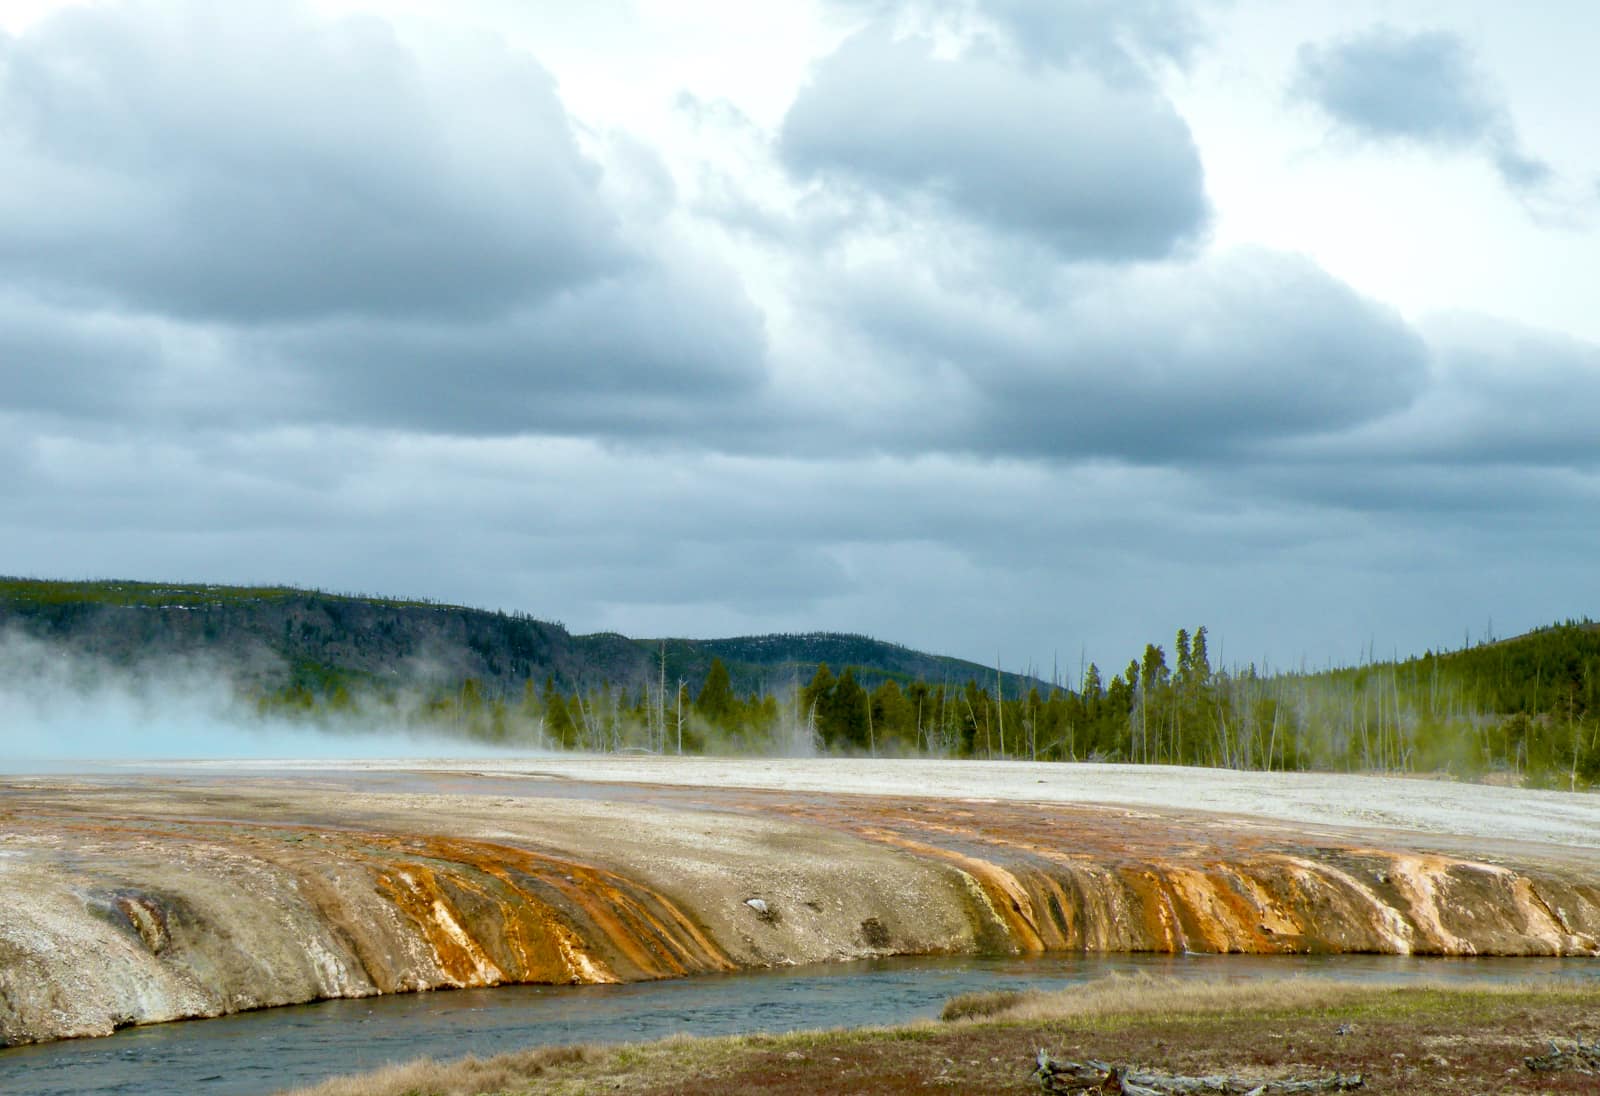 Geothermal formation and river in foreground with clouds in background